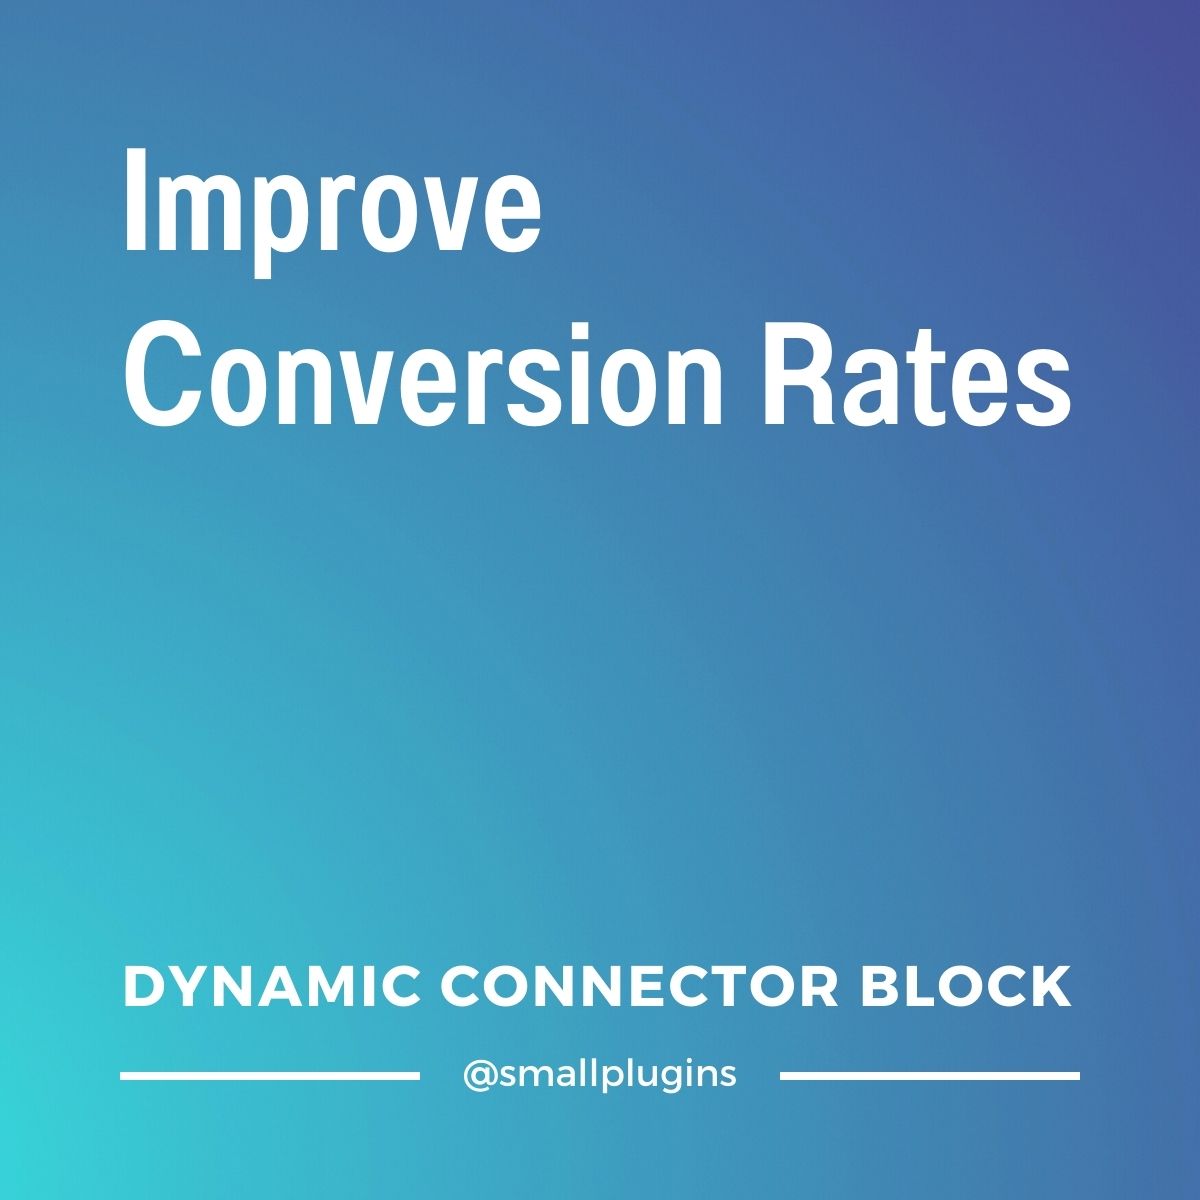 How dynamic connector block improves conversion rates